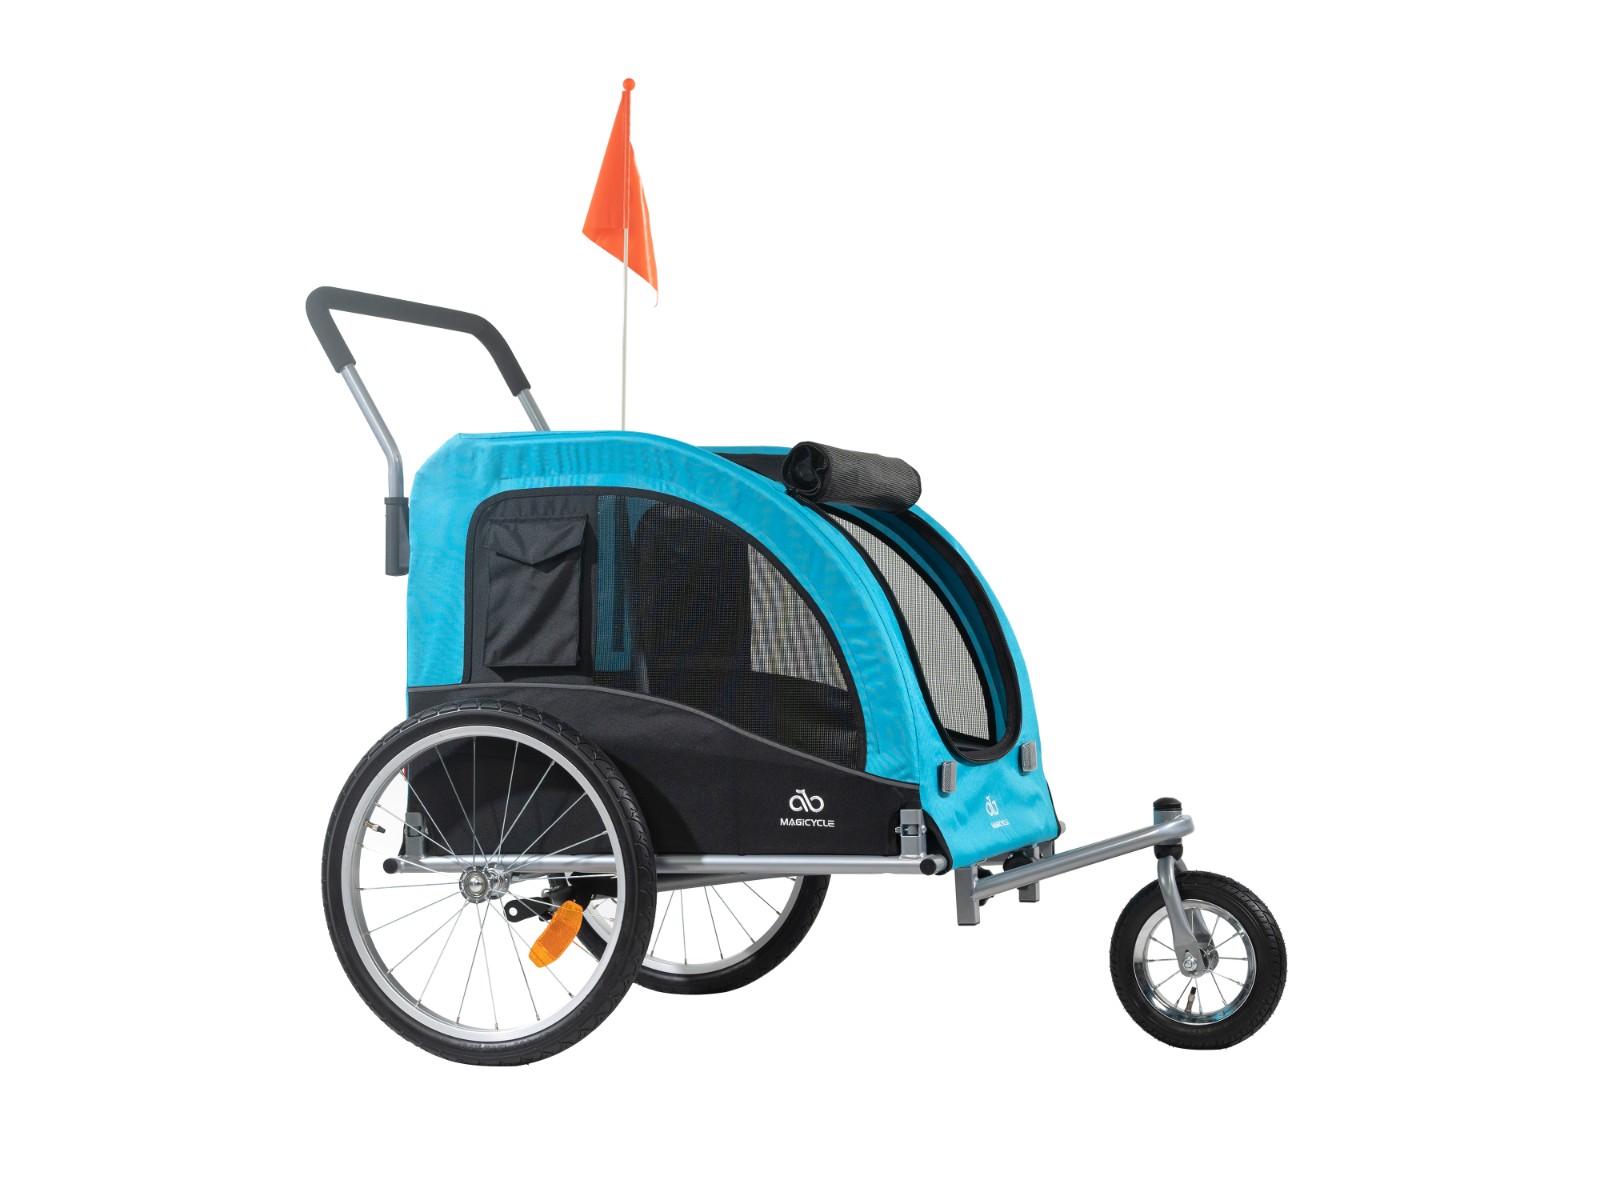 MAGICYCLE Pet Trailer